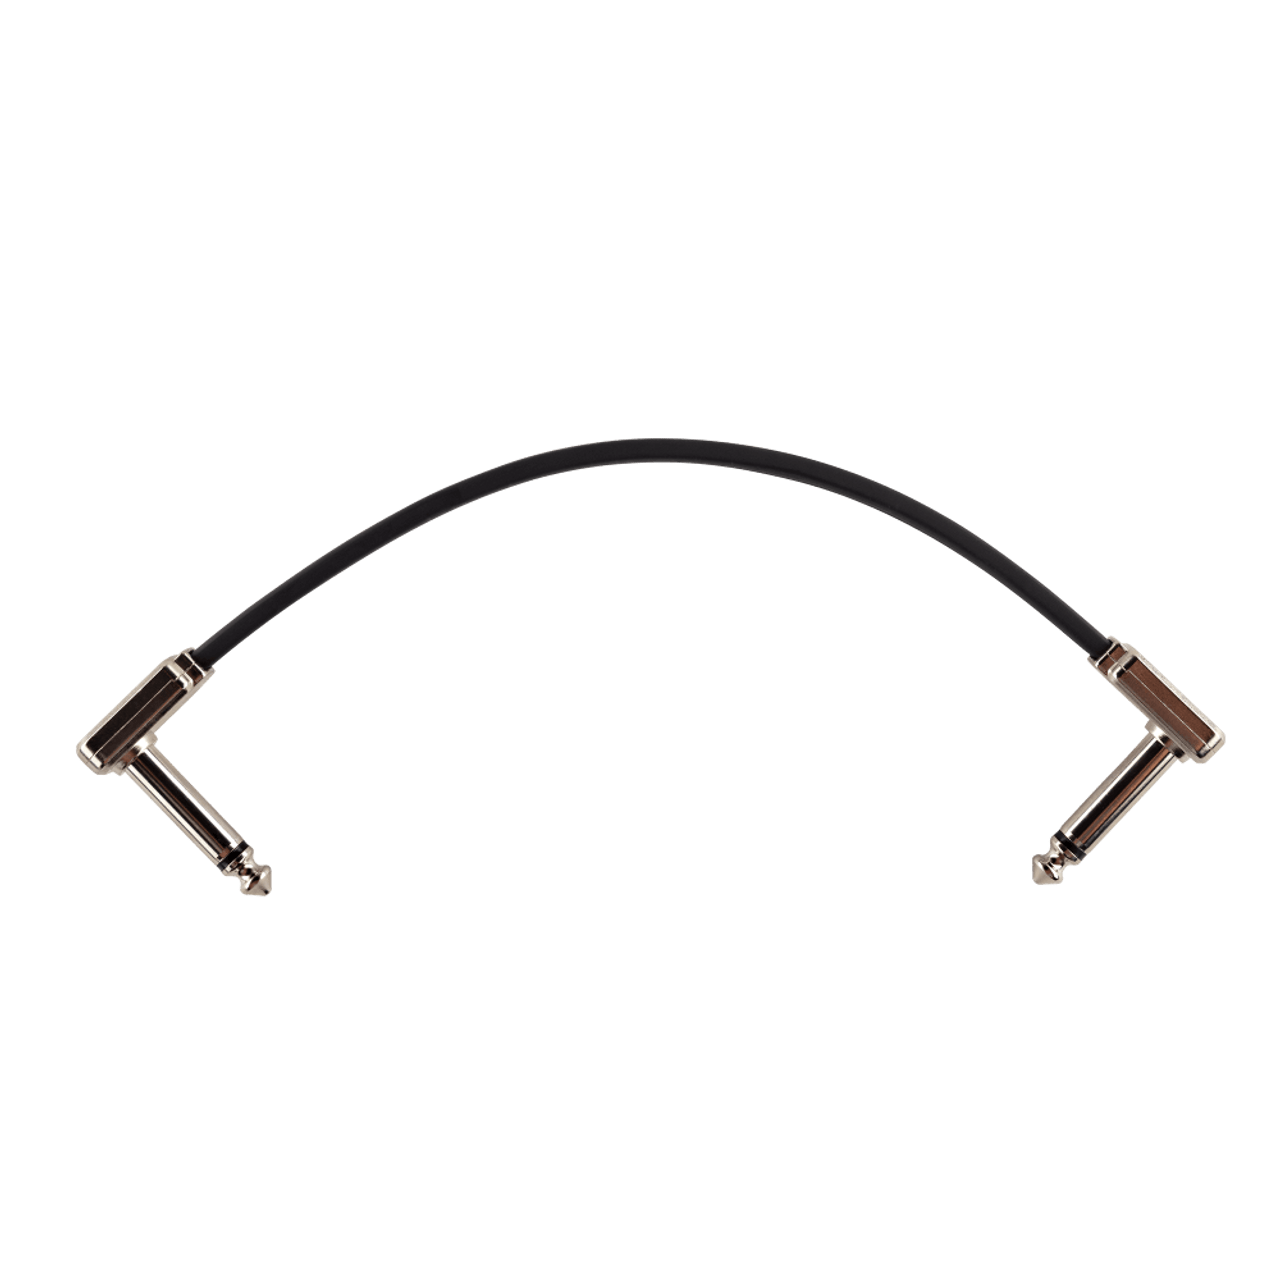 Ernie Ball Flat Ribbon Patch Cable 6in - Black - Single